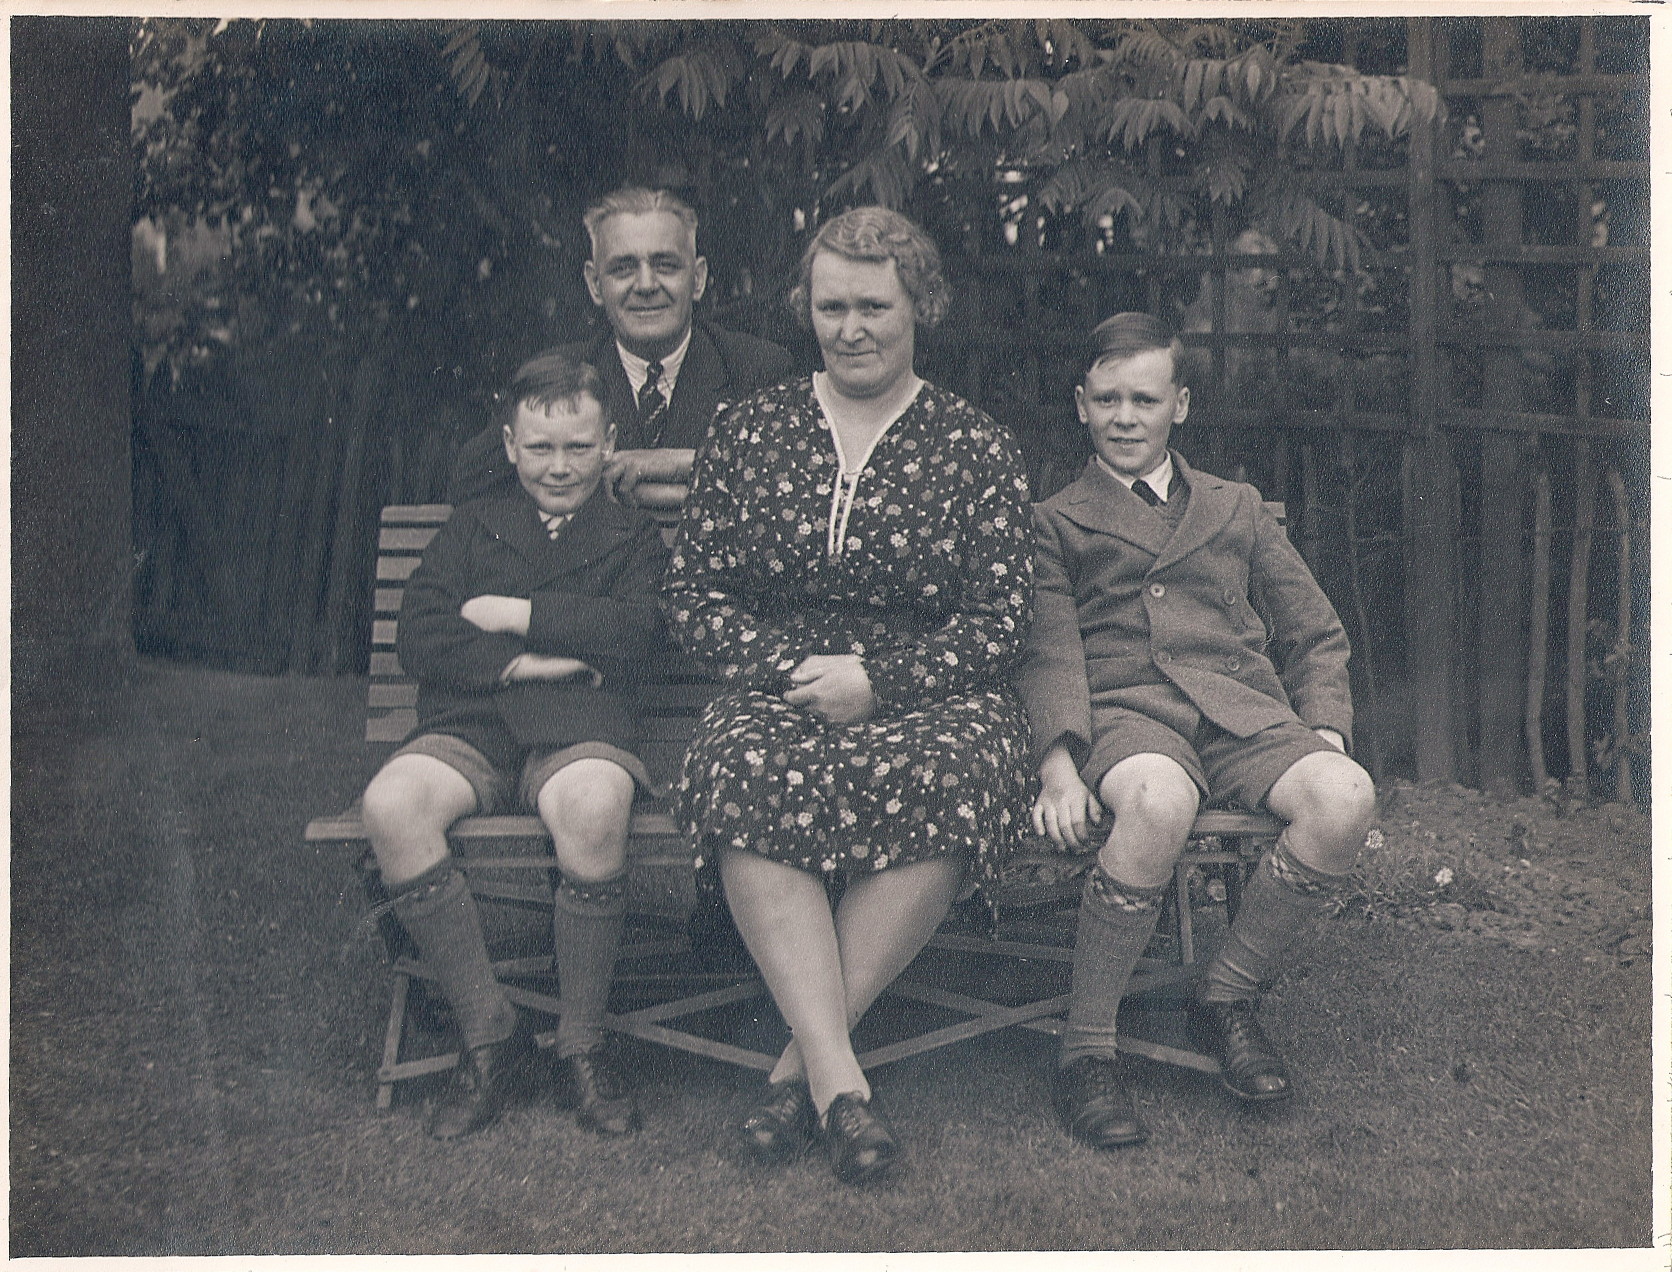 black and white photo\' showing a middle-aged woman with wavy brown hair and a dark, floral-print summer dress, seated on a garden bench and flanked by two boys aged about ten and wearing shool uniform, with a man with short, sticking-up grey hair leaning on the back of the bench